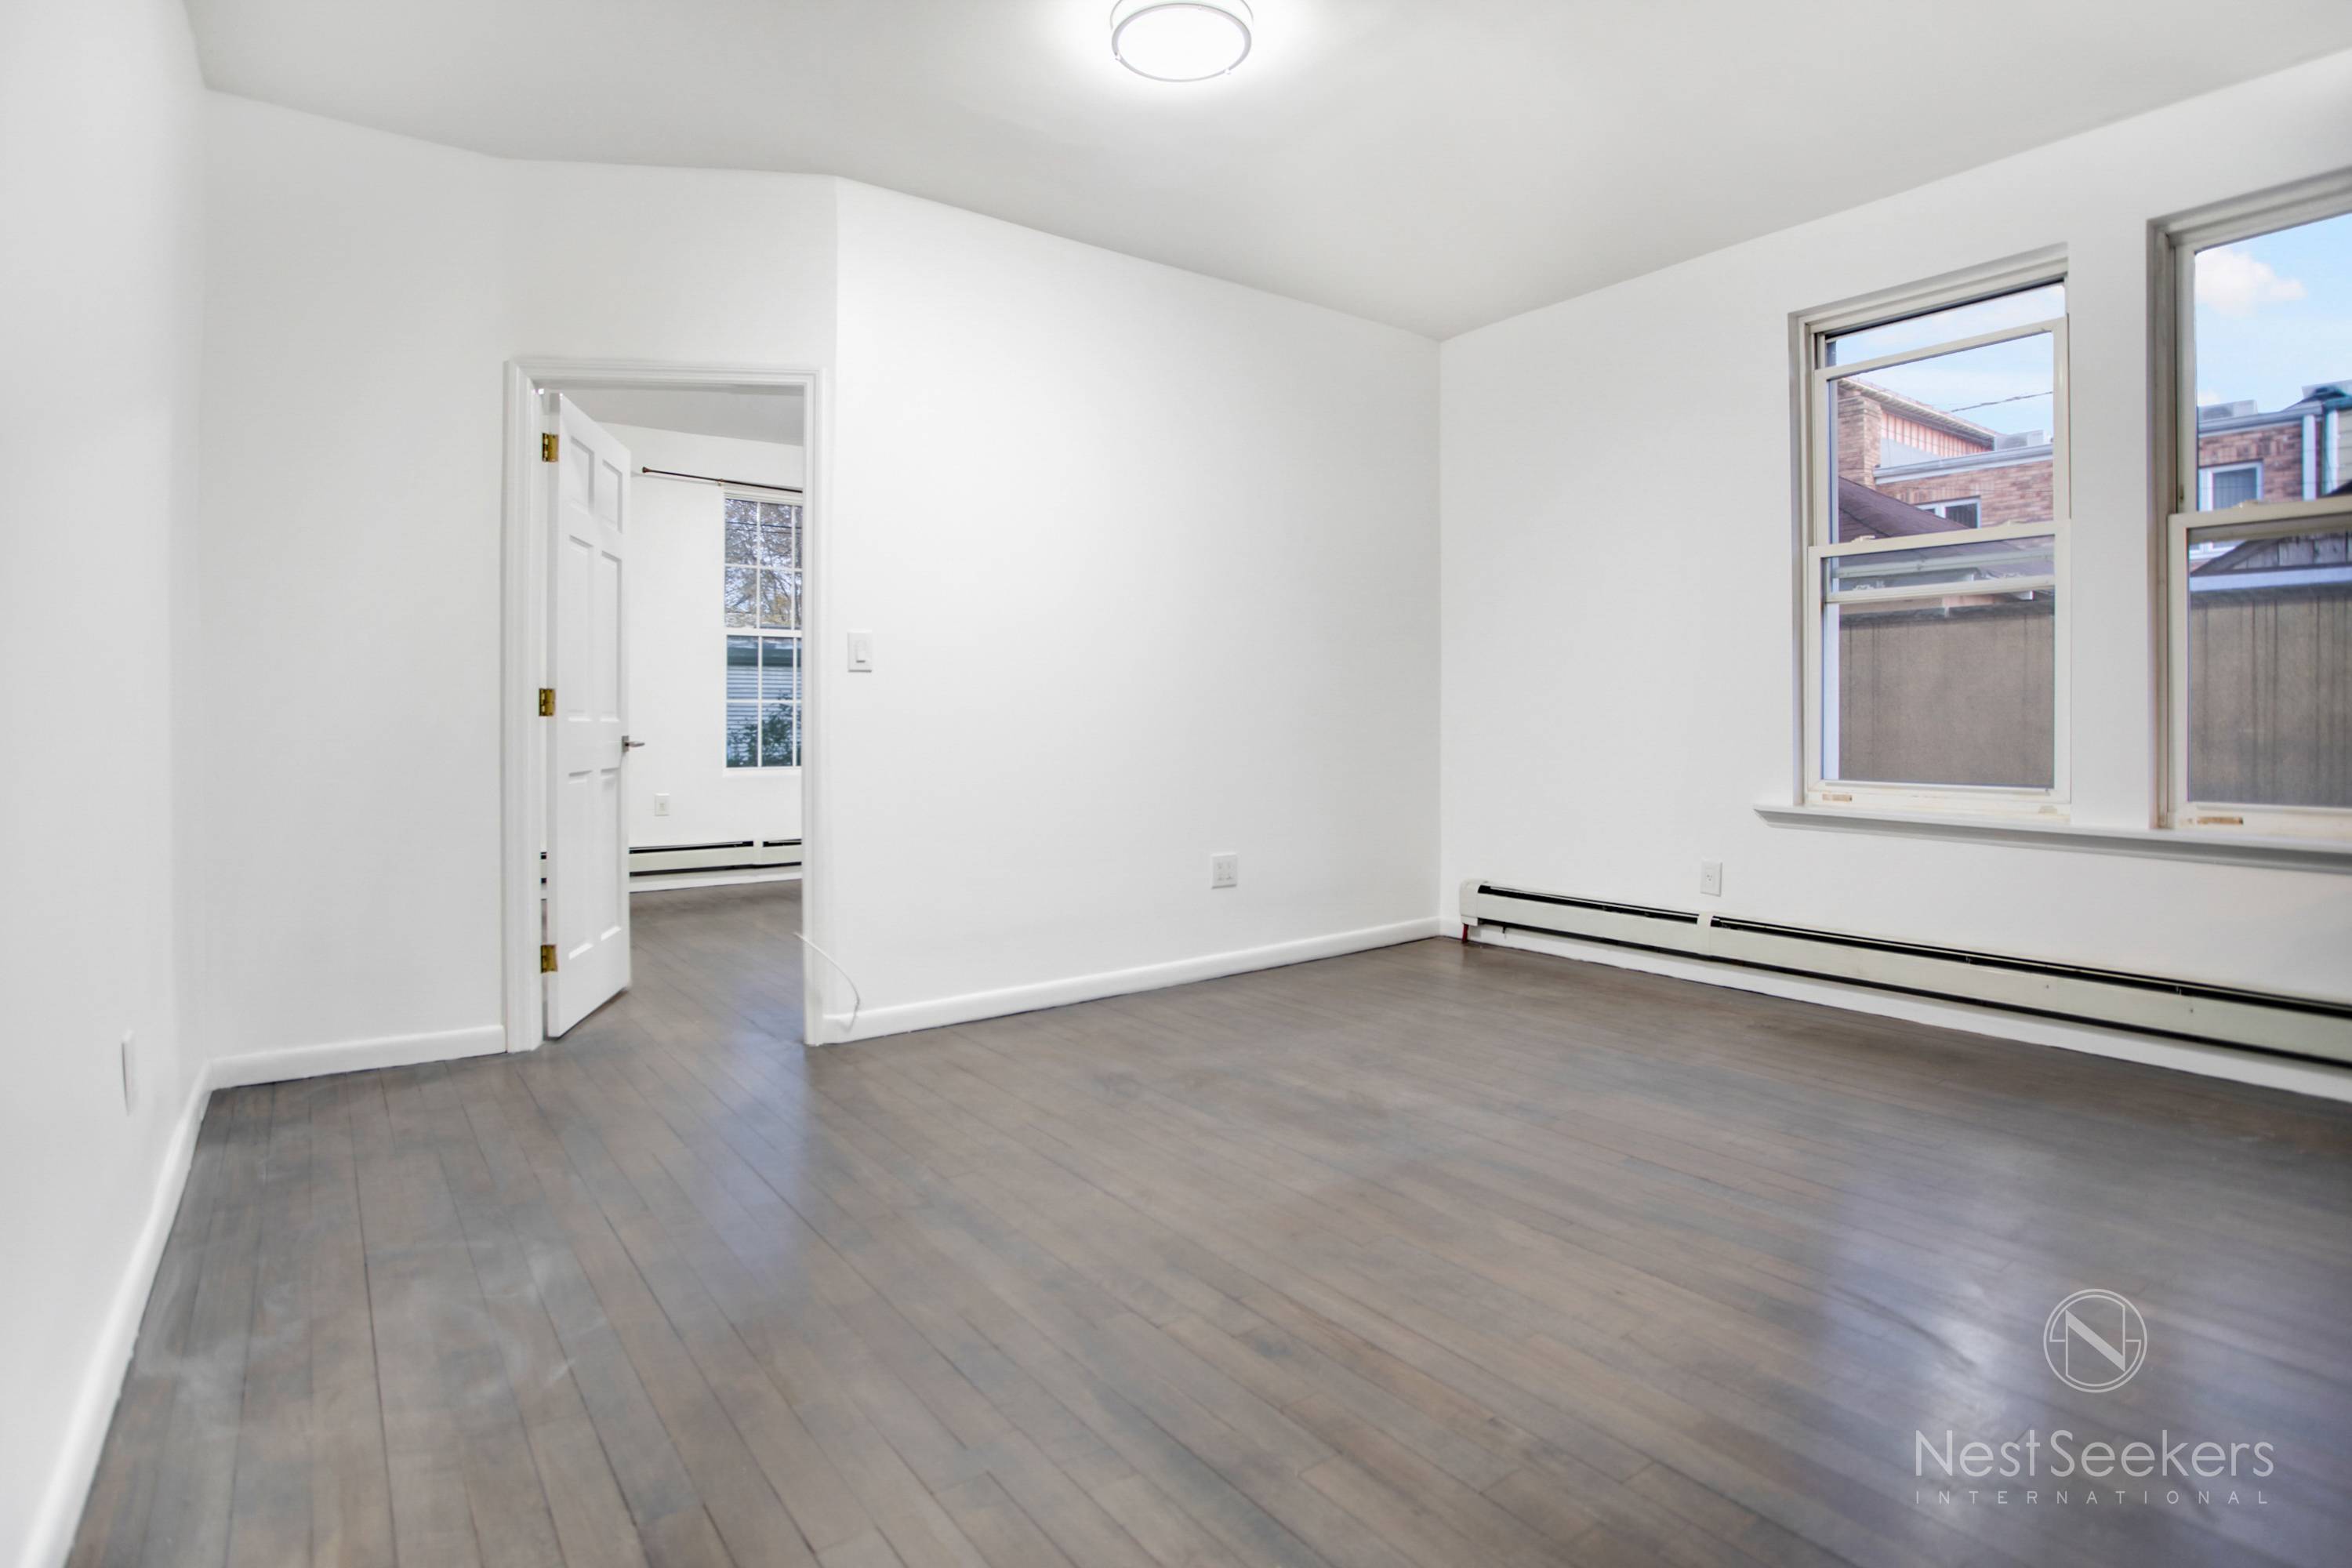 Large Renovated 2 bedroom in Astoria / PS122 - NO FEE